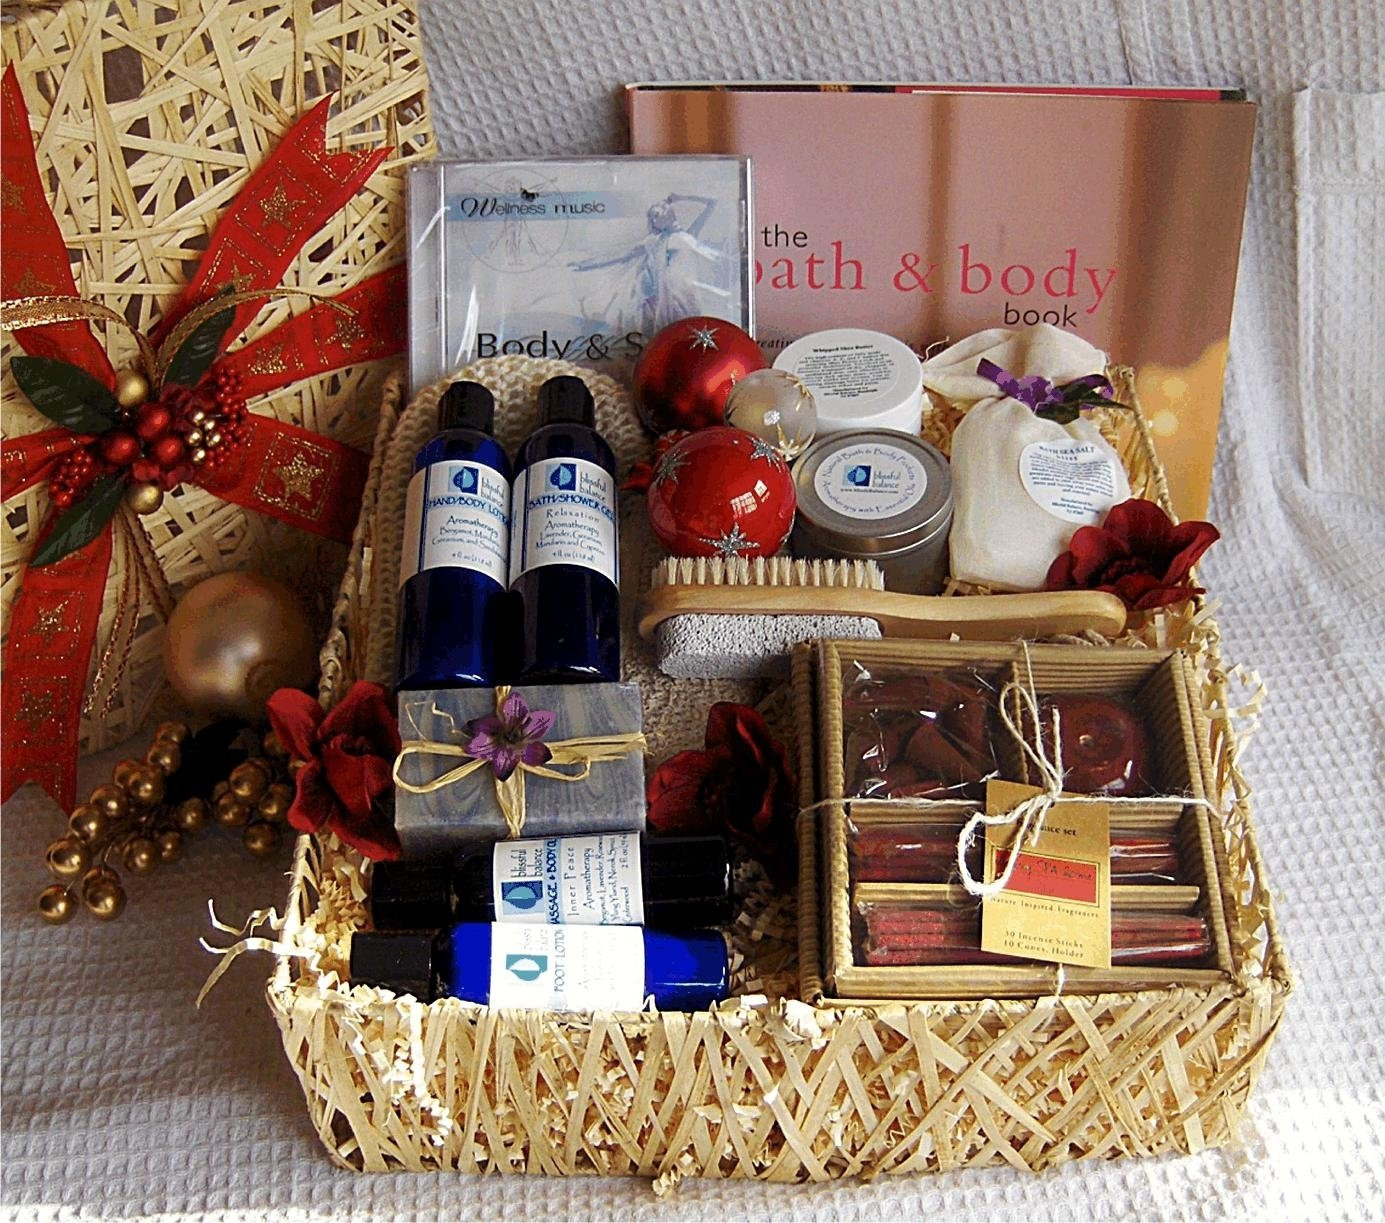 Holiday Gift Ideas Couples
 10 Stylish Christmas Gift Basket Ideas For Couples 2020